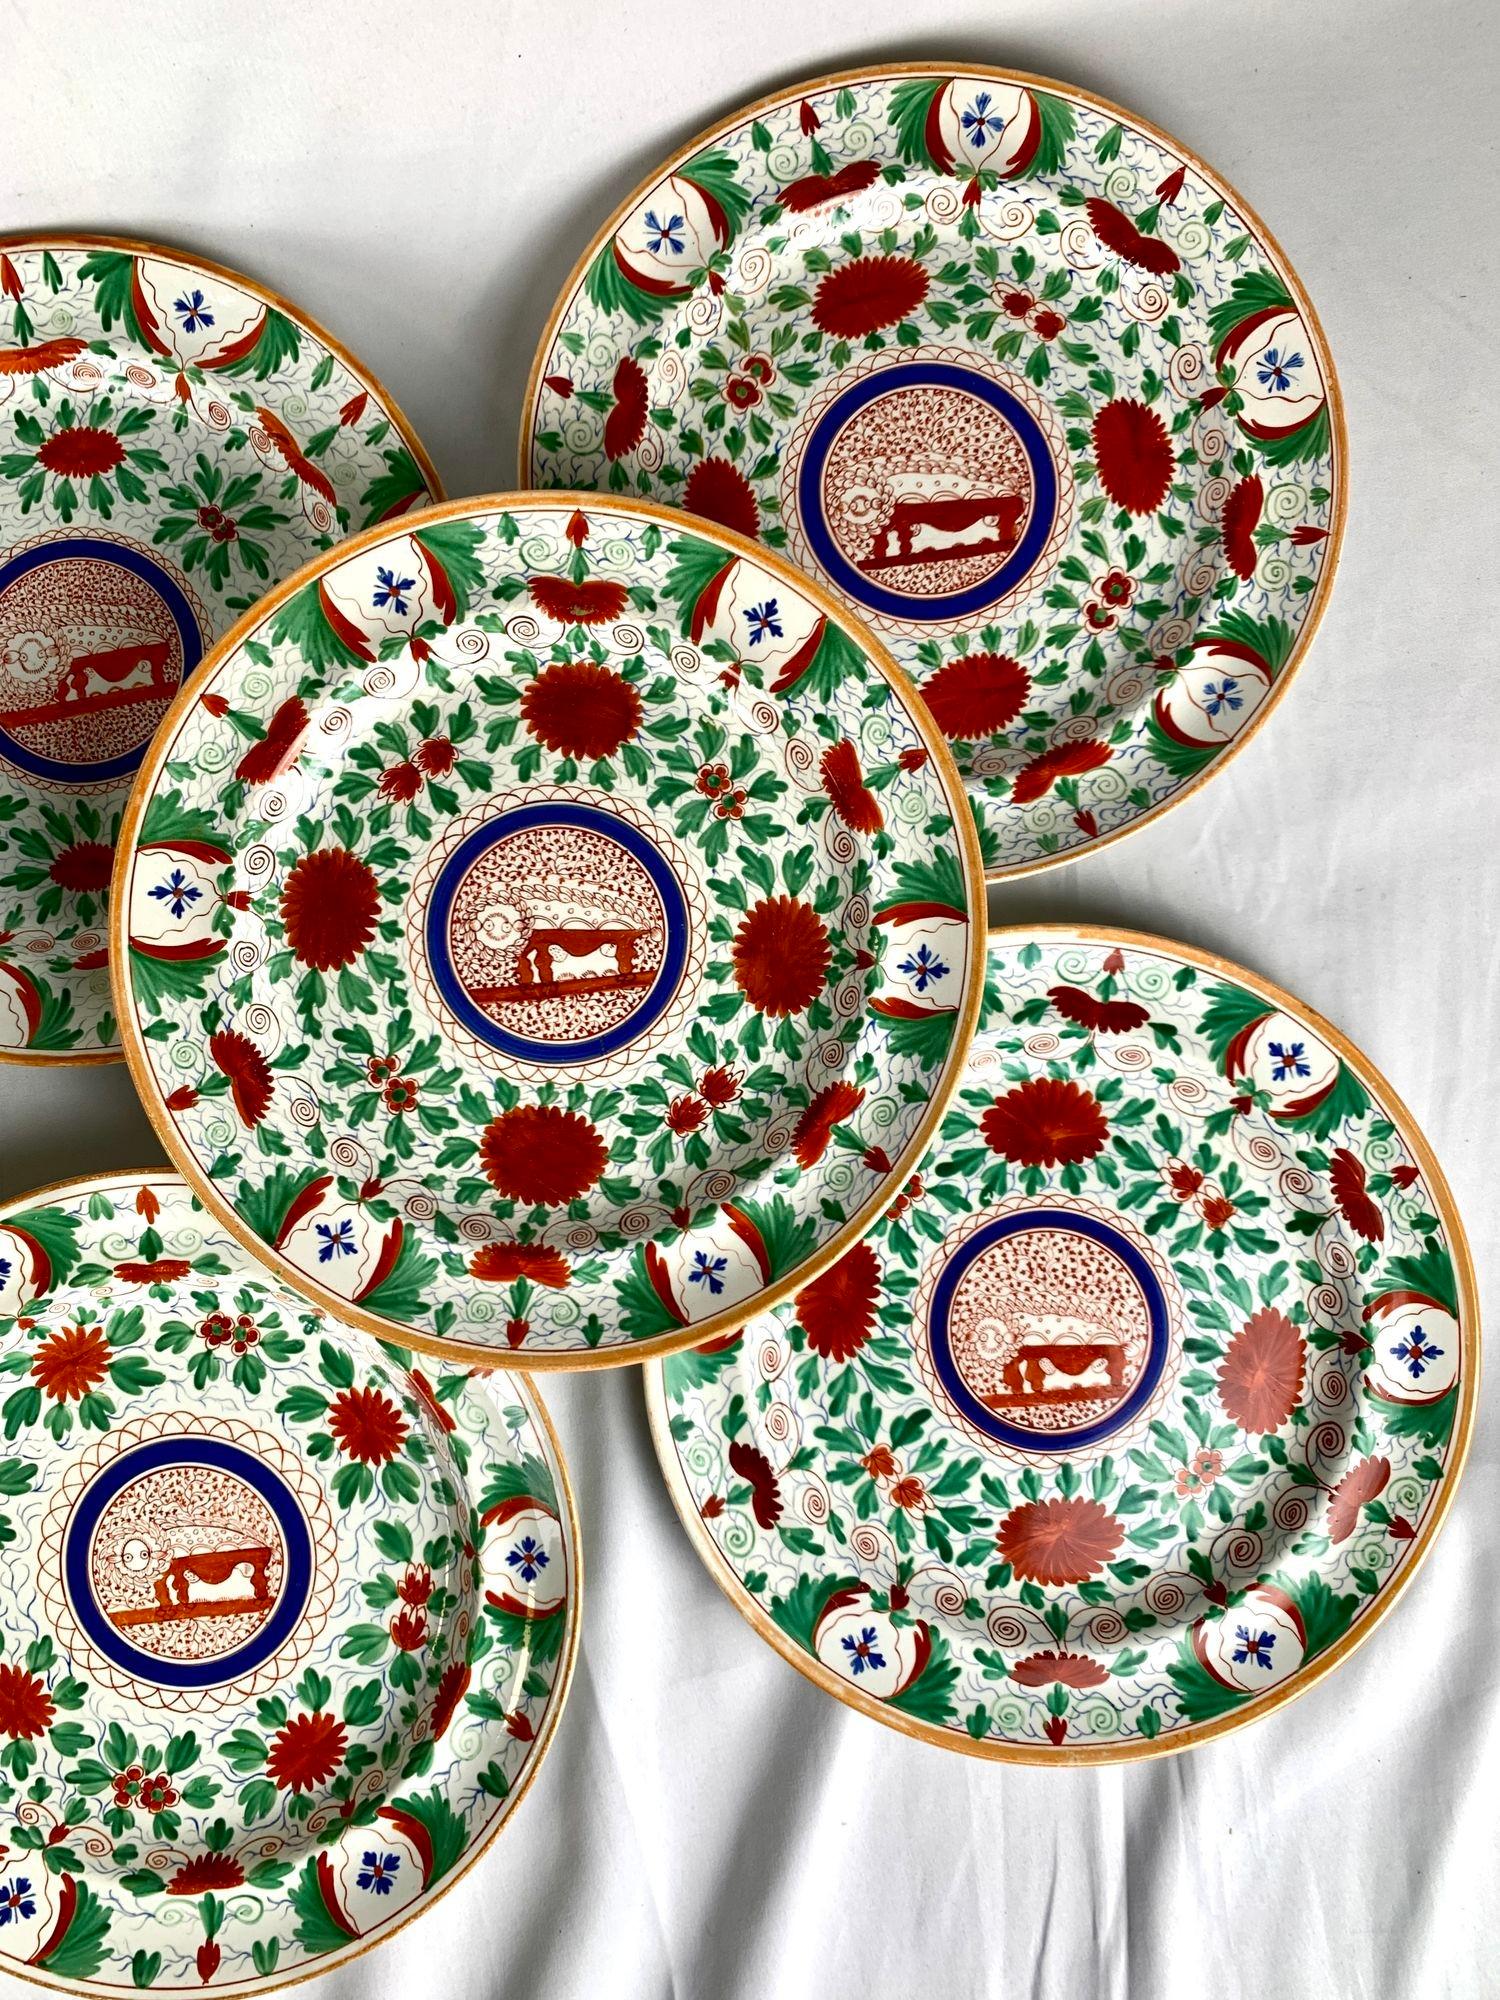 Creamware Eleven Crazy Cow Dinner Plates Hand Painted by Minton England Circa 1820